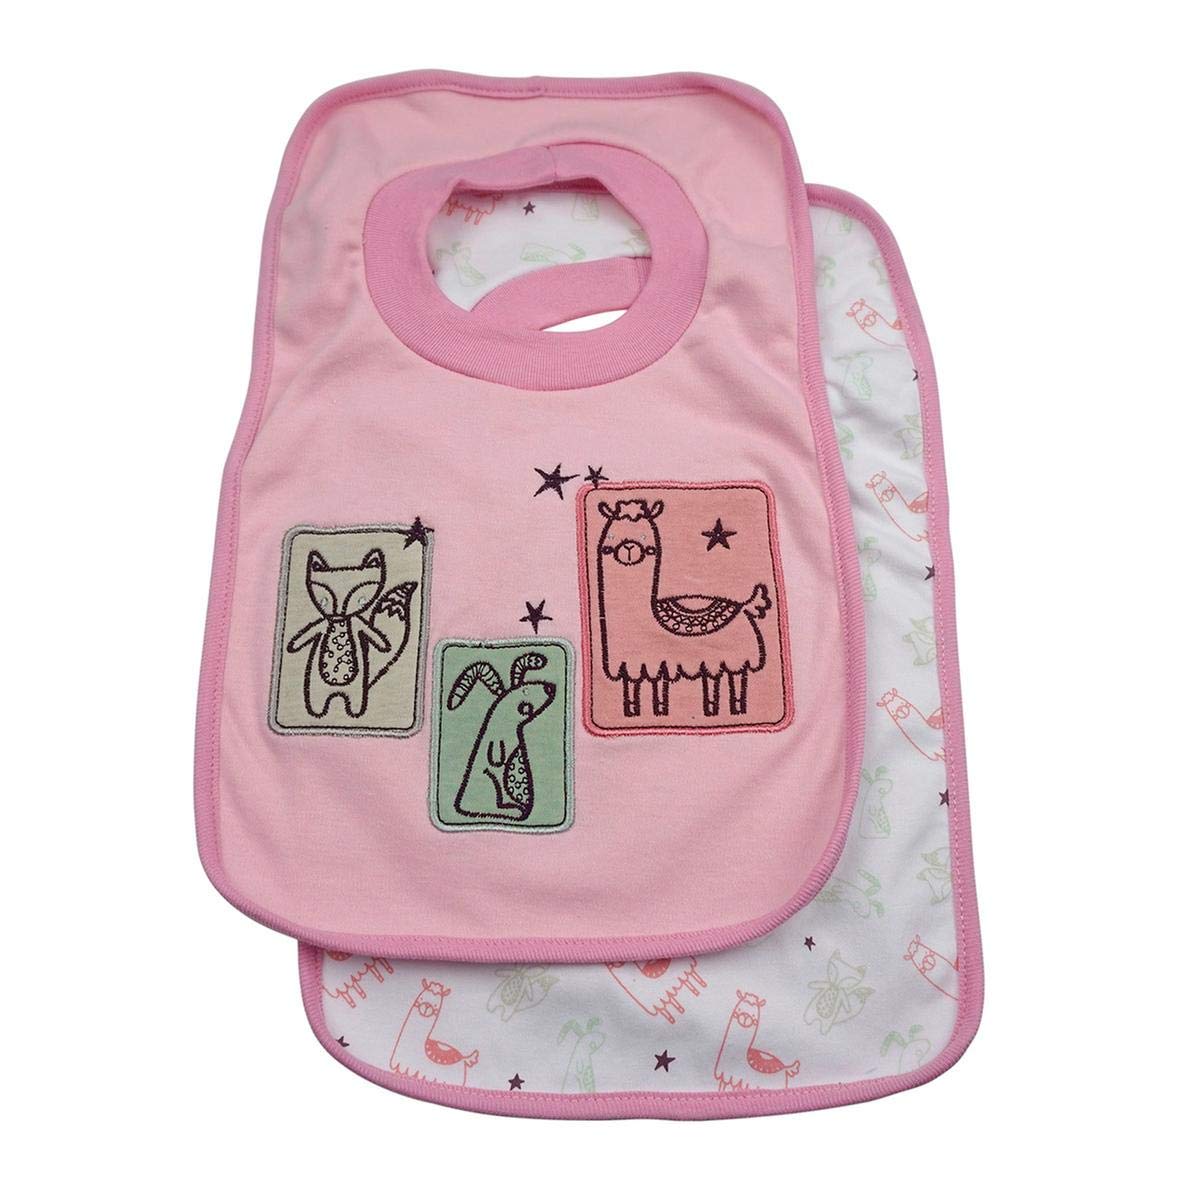 Olmitos Woodland Cotton Bibs (Pack of 2)